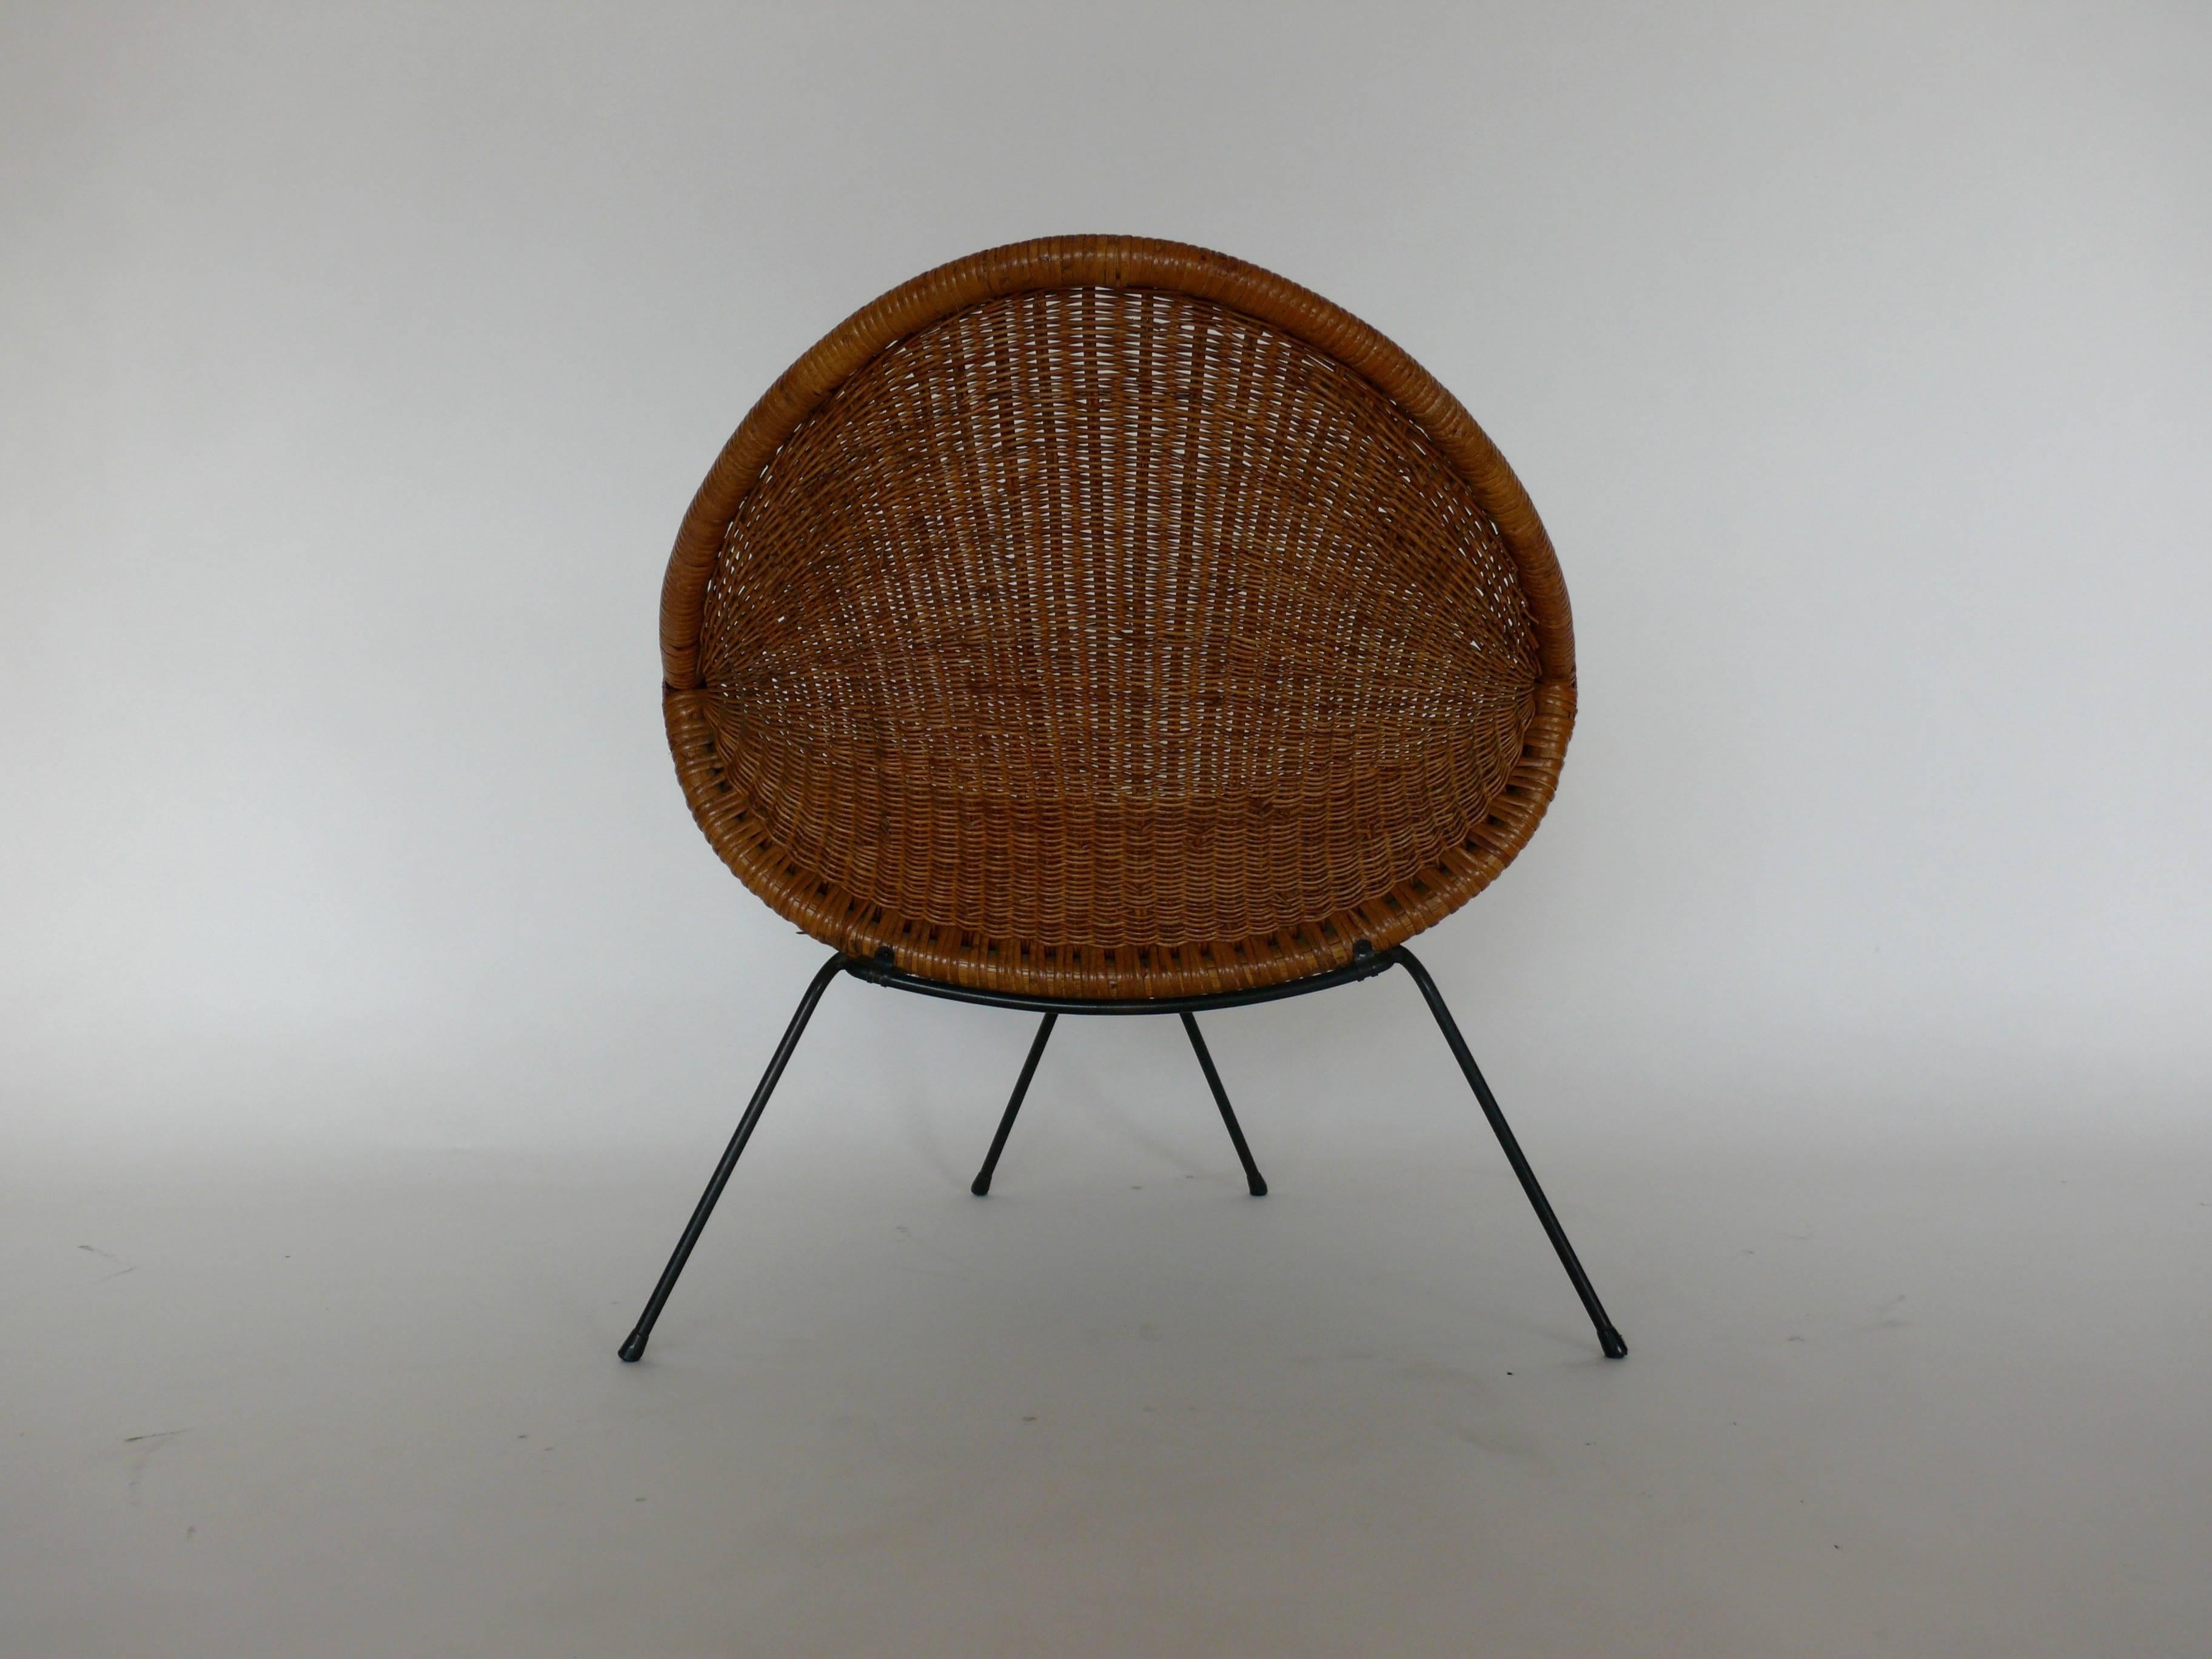 Italian Iron and Wicker Sculptural Chair